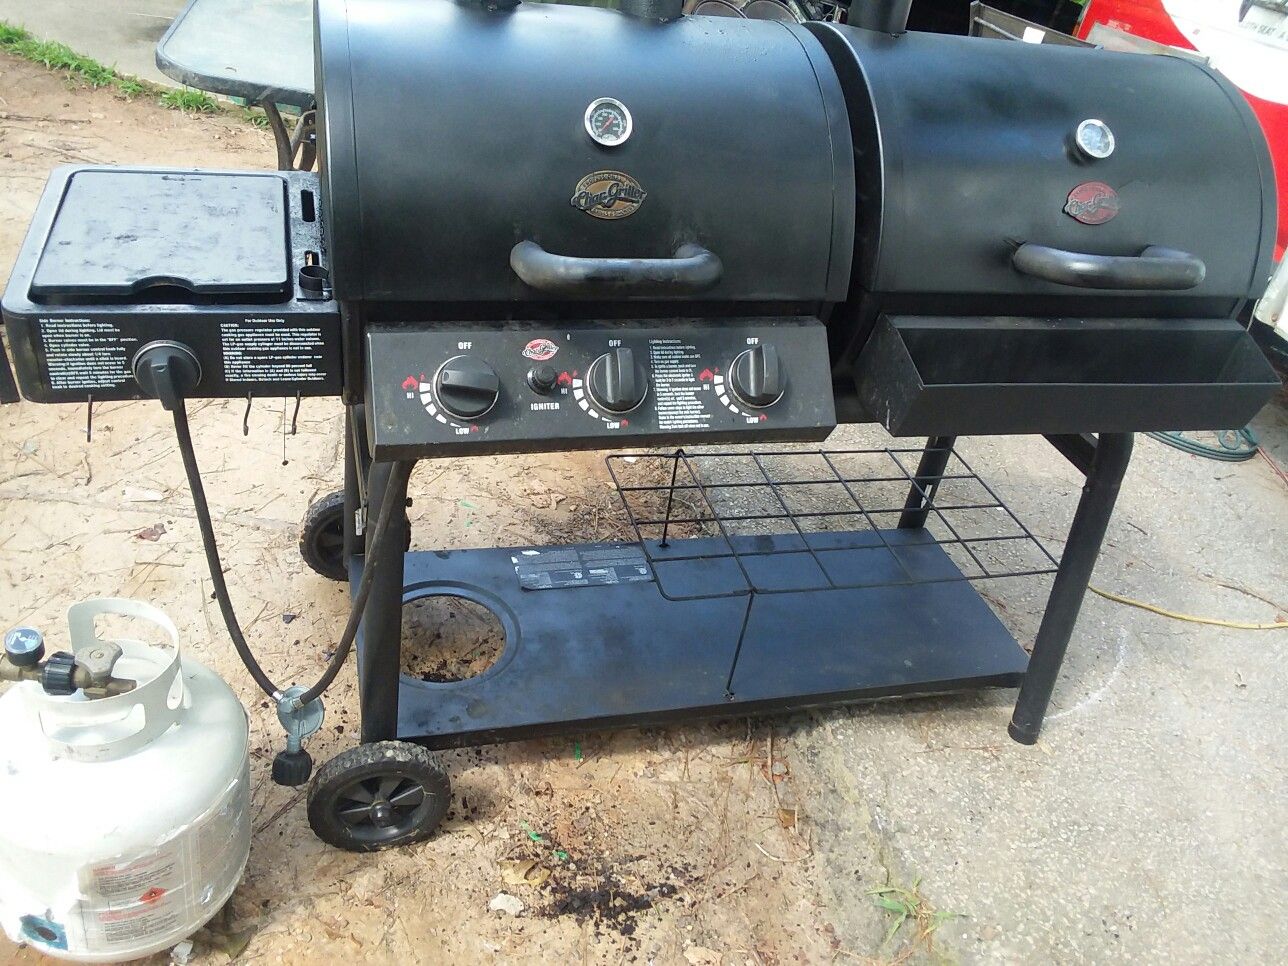 Charcoal/propane grill with tank